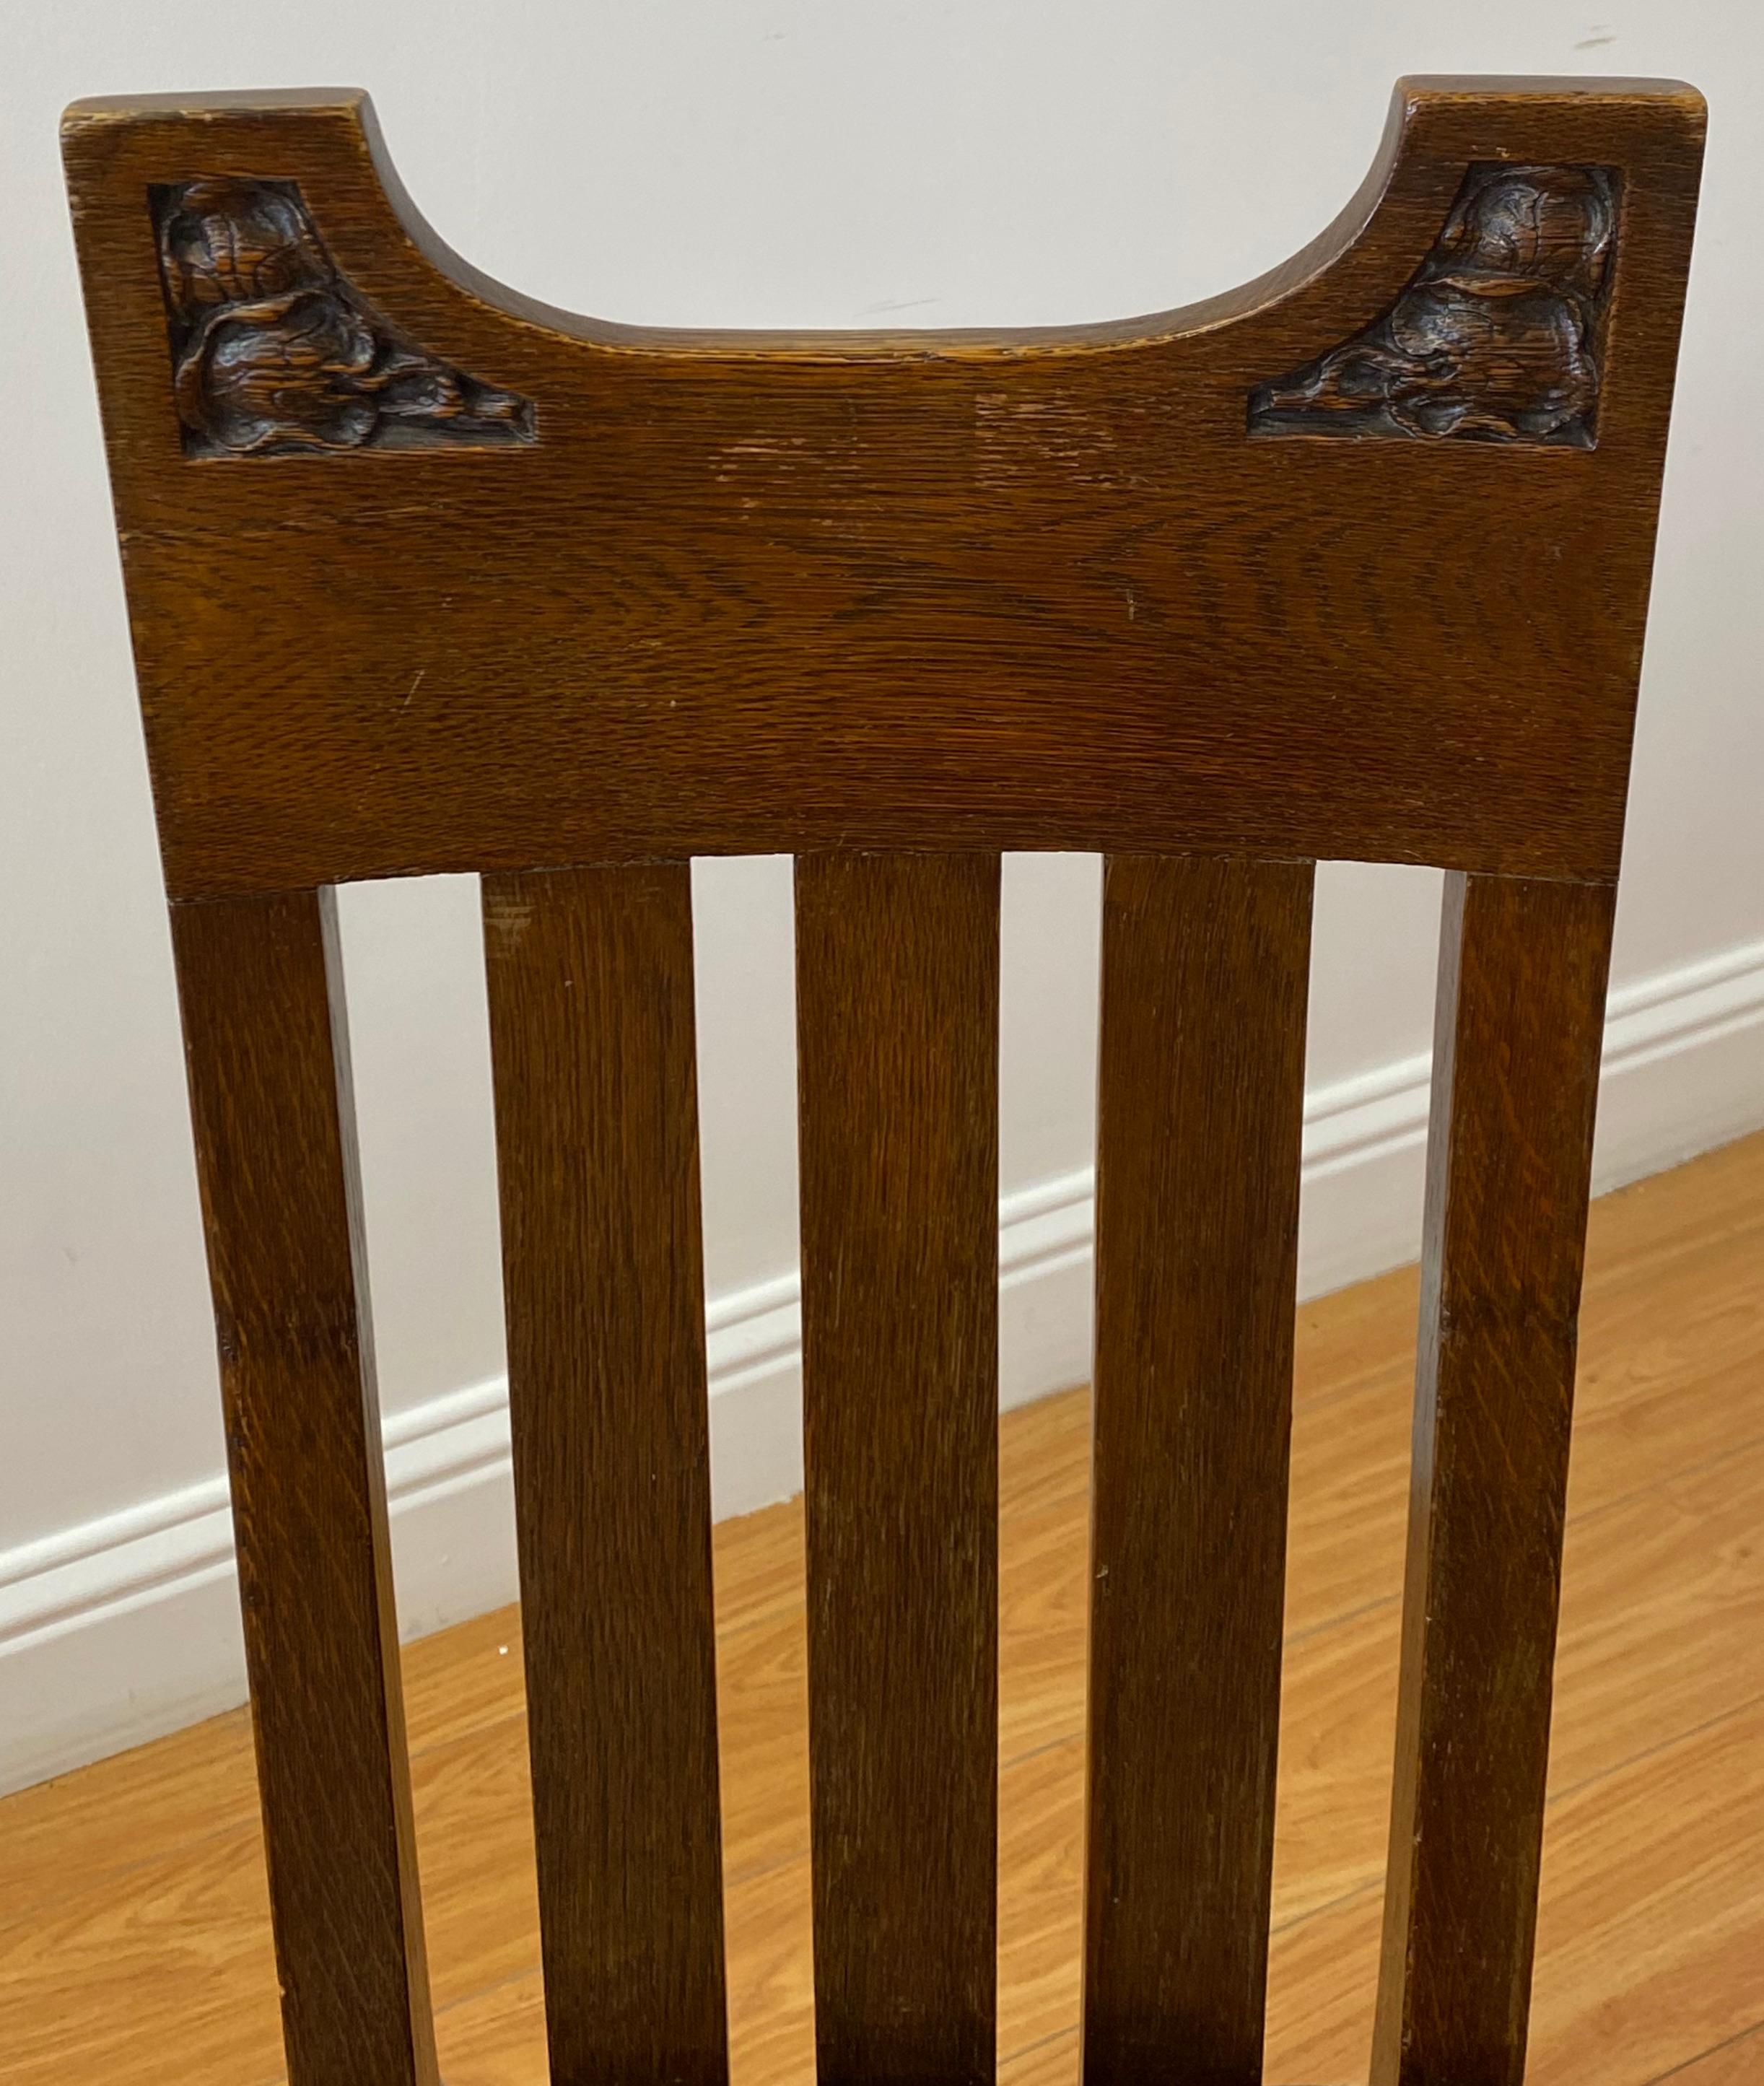 Arts & Crafts American oak side chair, C.1920

Hand carved - Custom made - Leather upholstery

Measures: 19